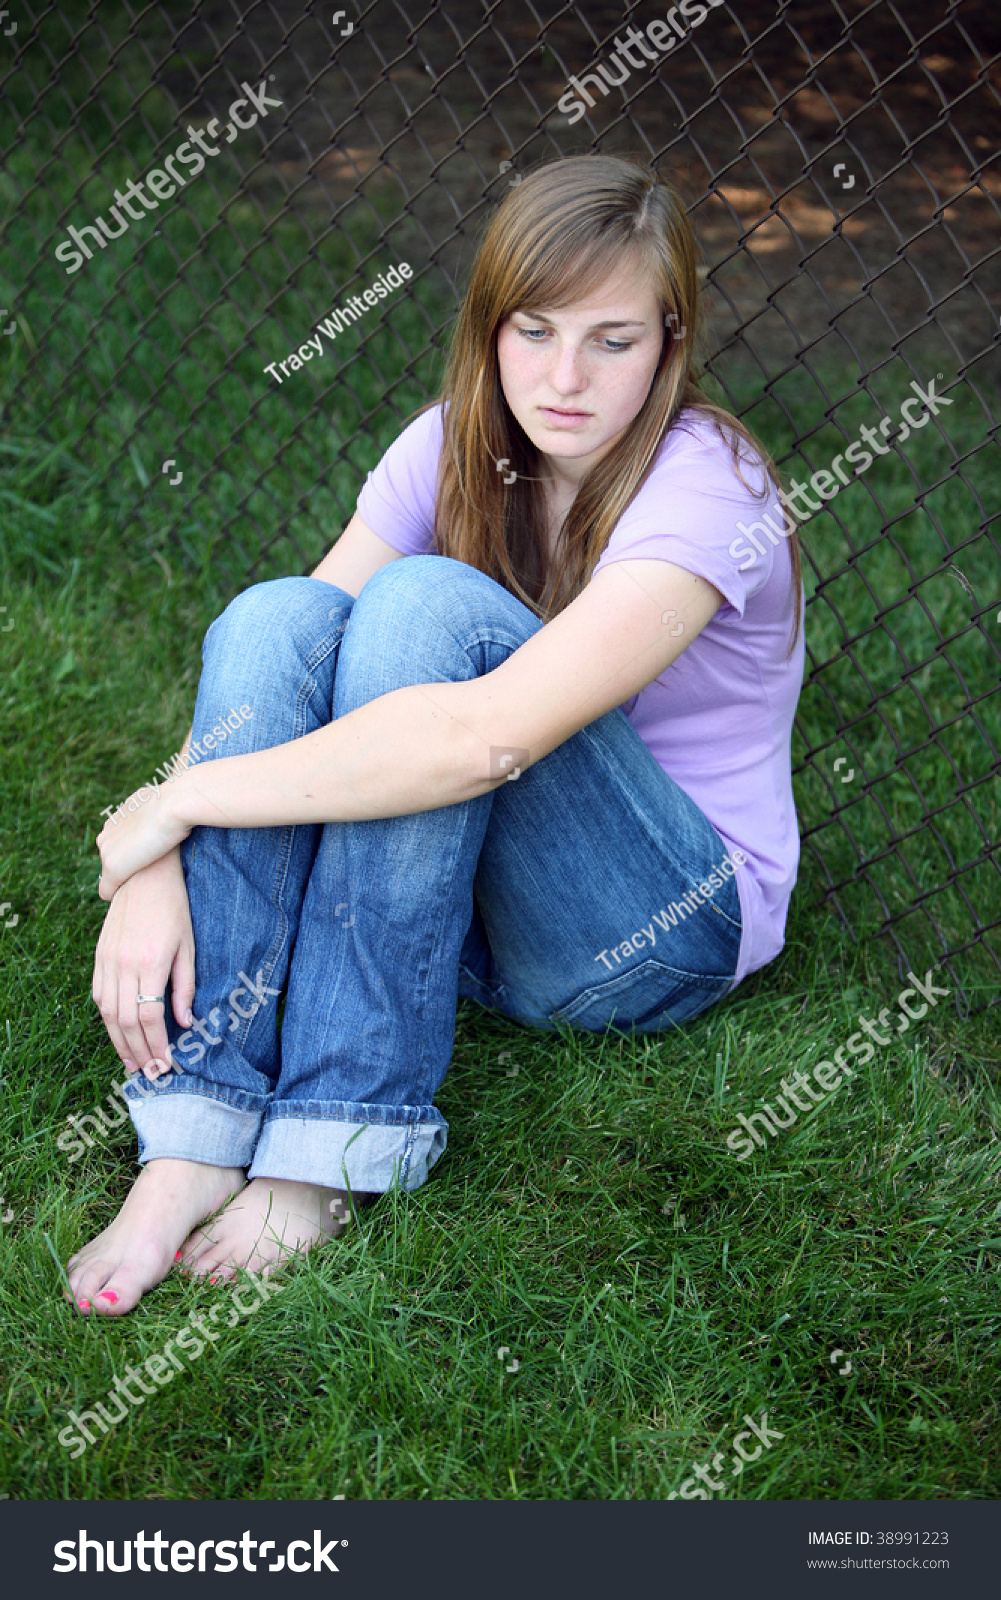 Depressed Teen Girl Sitting Against Fence In Grass Stock Photo 38991223 ...